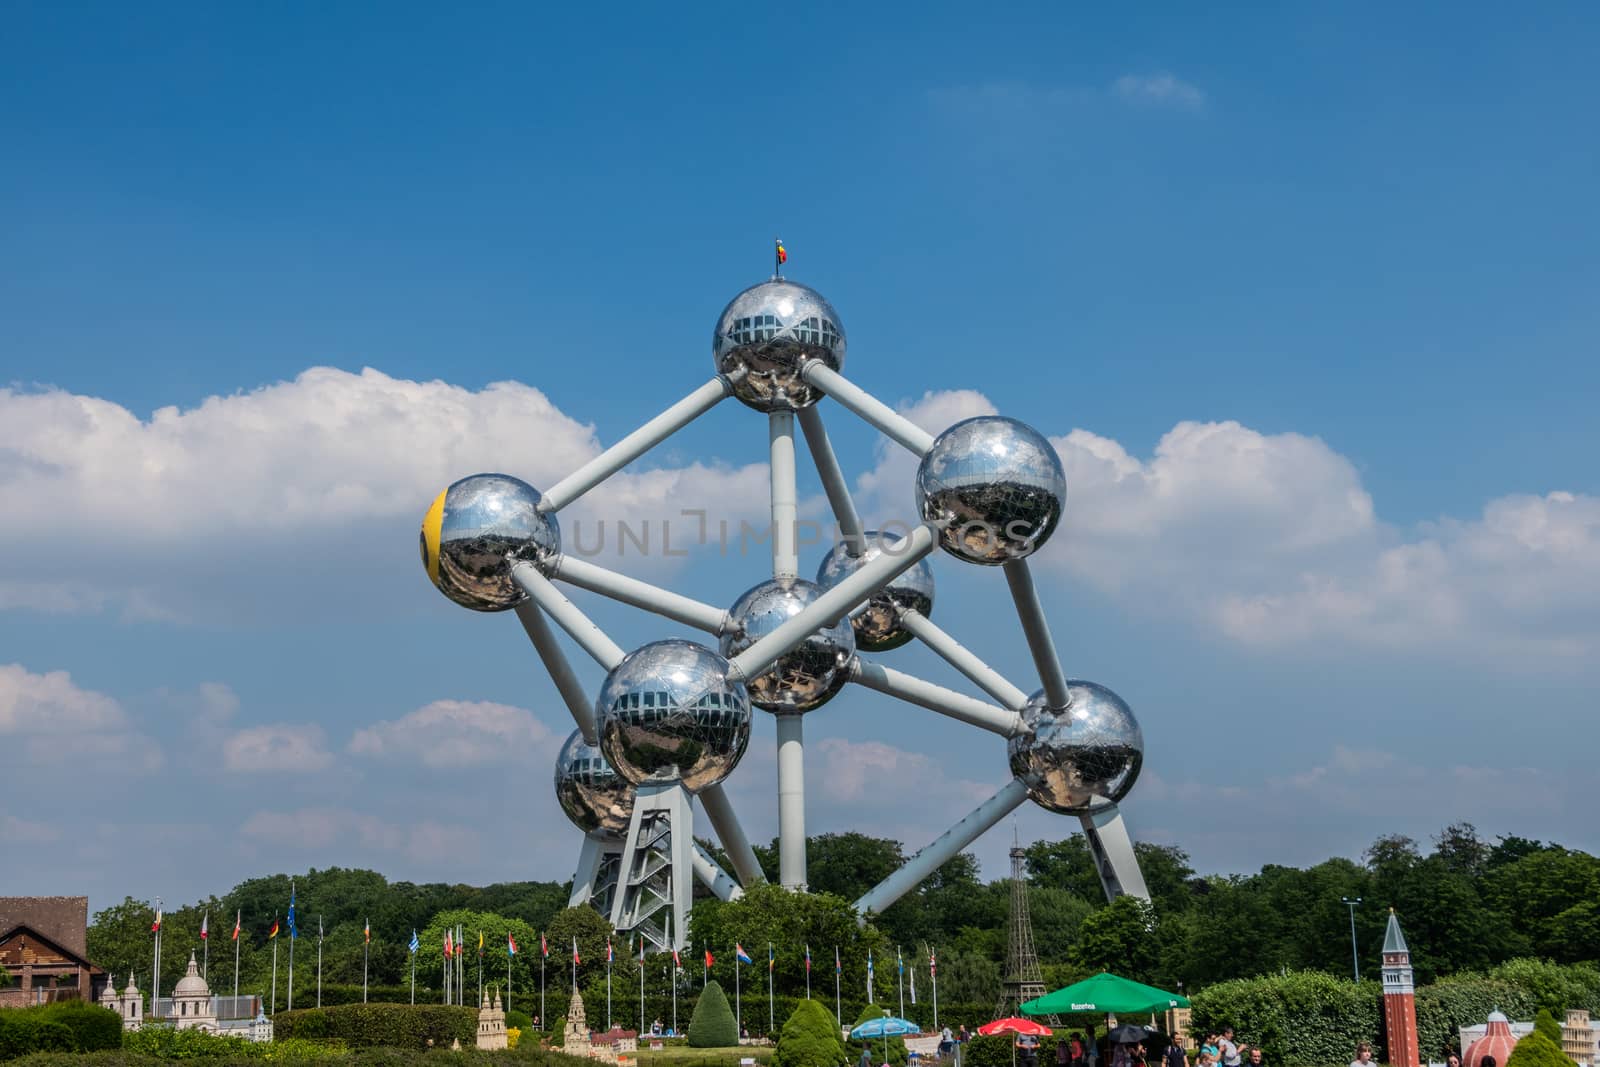 Atomium monument seen from Mini-Europe park in Brussels, Belgium by Claudine